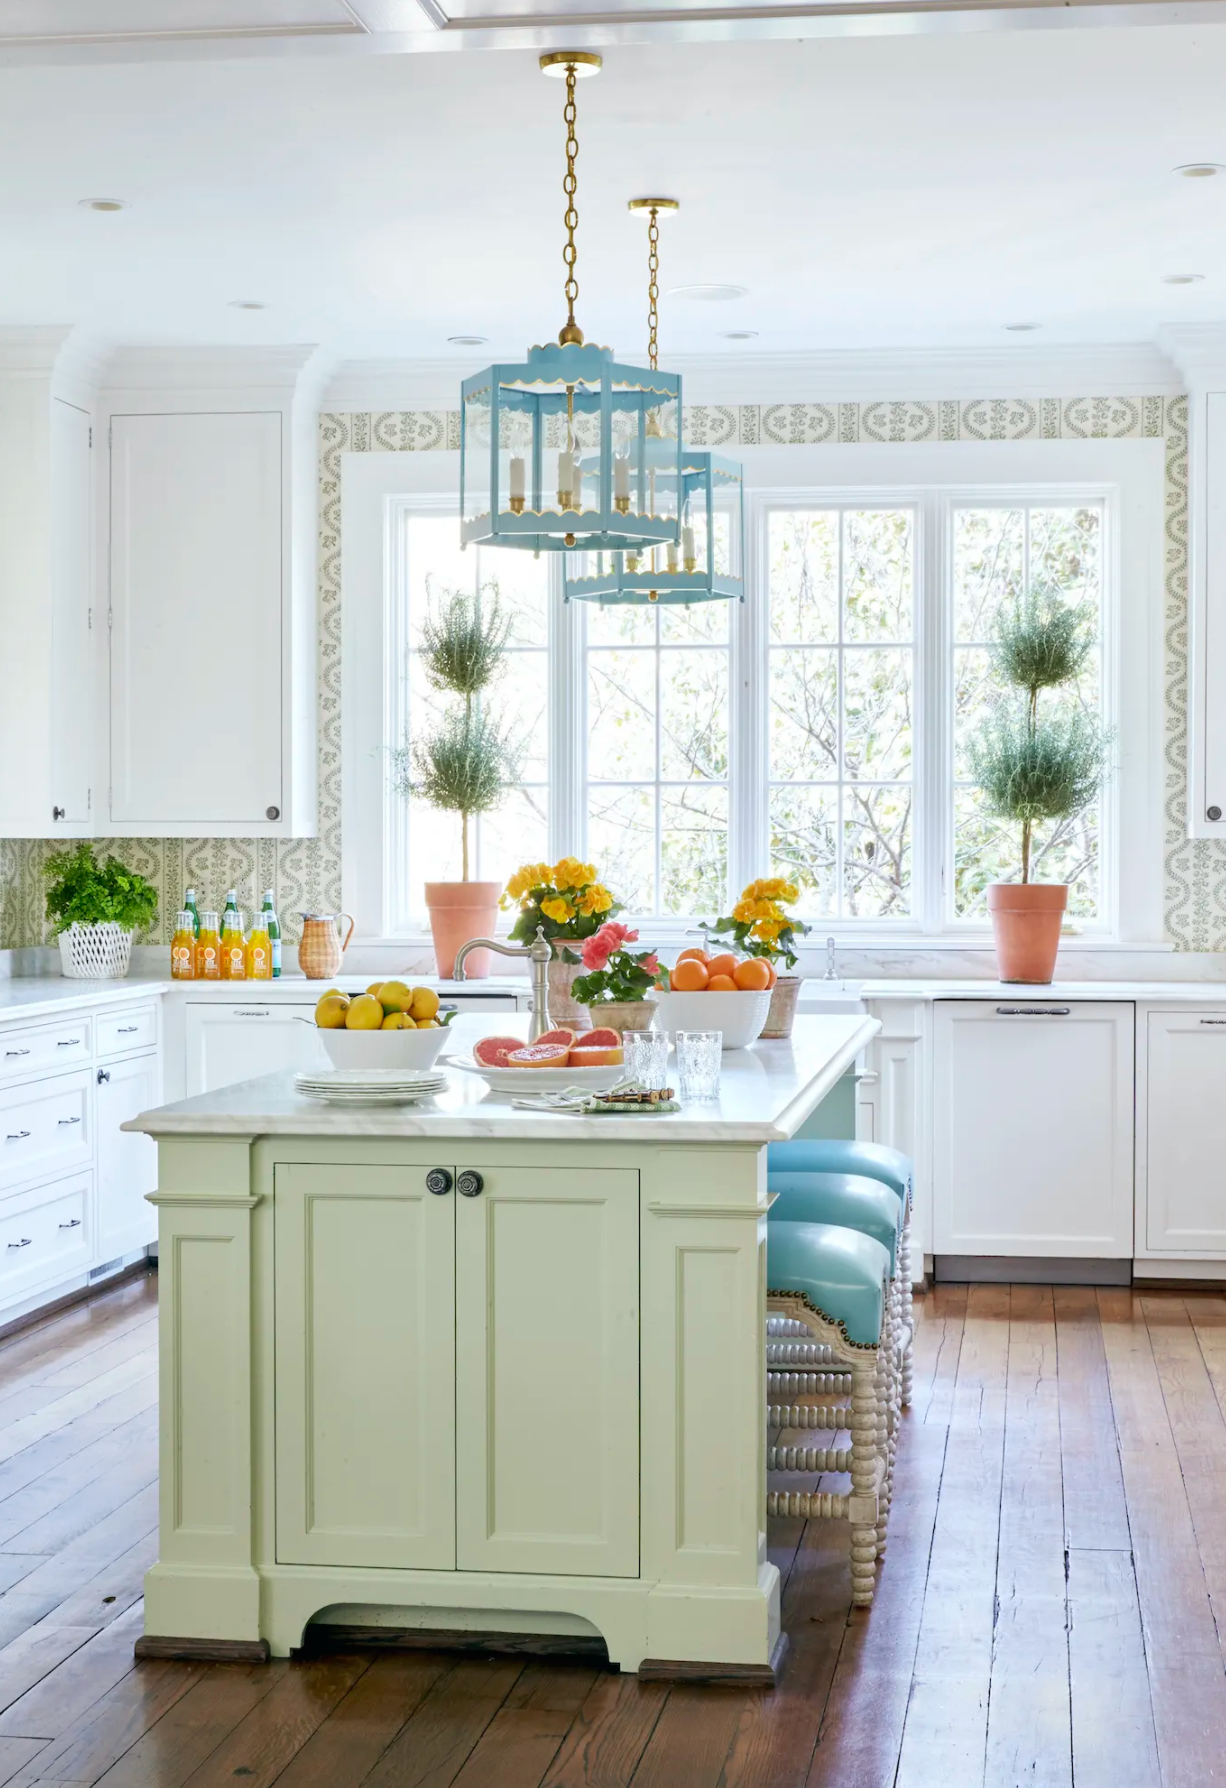 A Pair of Scalloped Lanterns in a Custom Color Over a Kitchen Island / Design by Sarah Bartholomew Interior Design / Photo Courtesy of Traditional Home Magazine